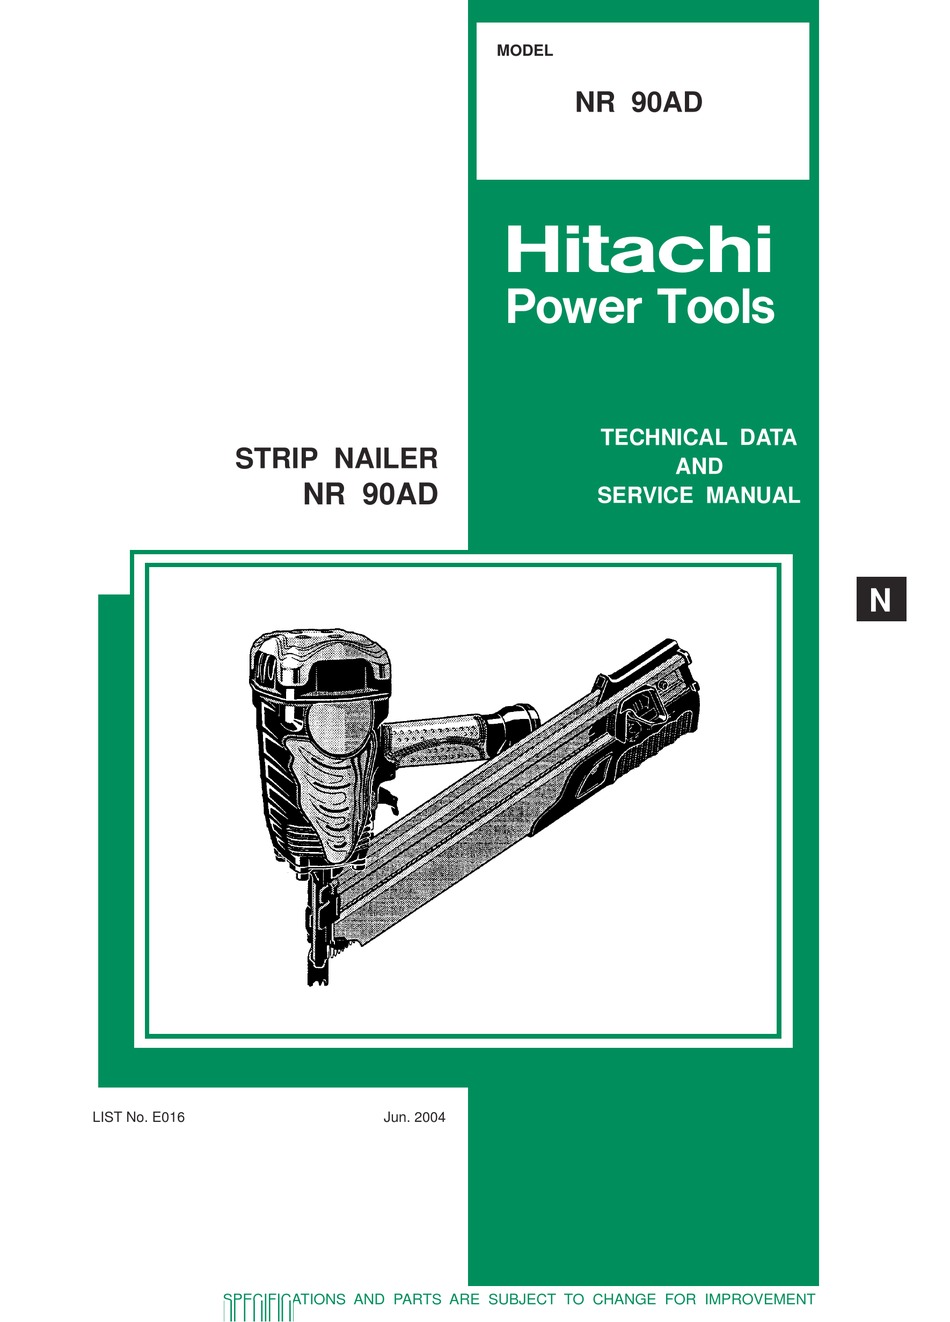 Hitachi Exhaust Cover 884-951 for STRIP NAILER NR 90AD NR90AD